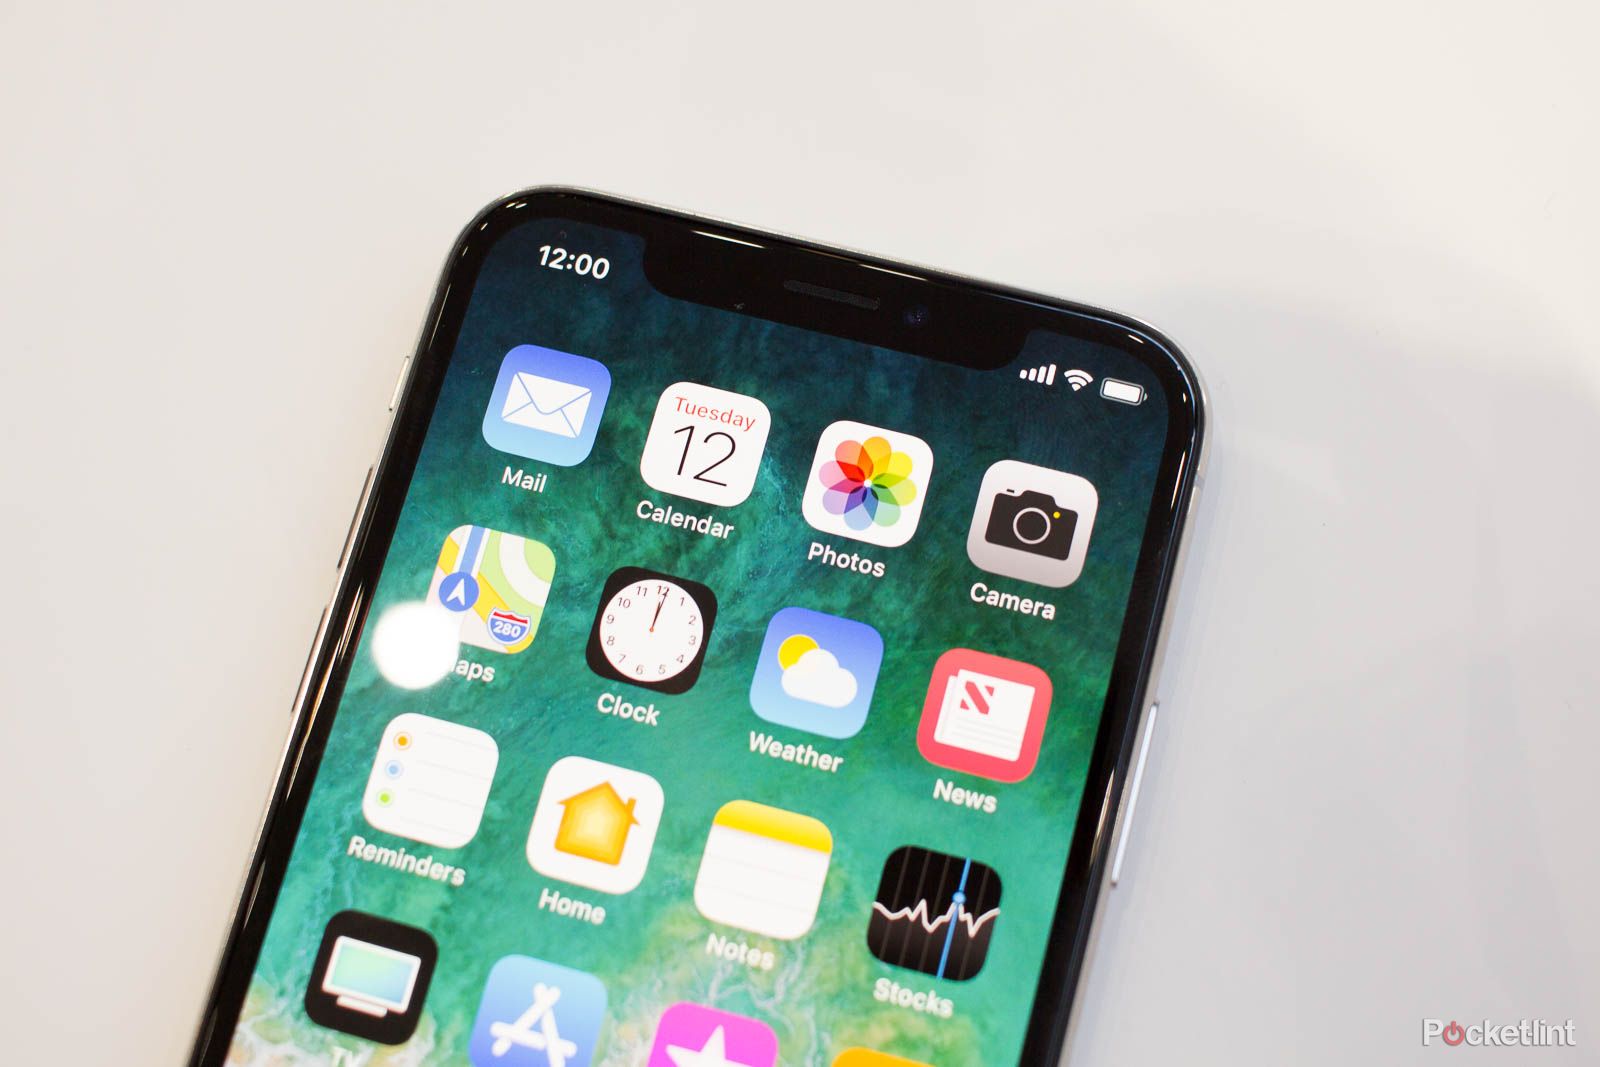 Apples cheaper LCD iPhone will have iPhone X style super-thin bezel thanks to advanced LED backlight image 1